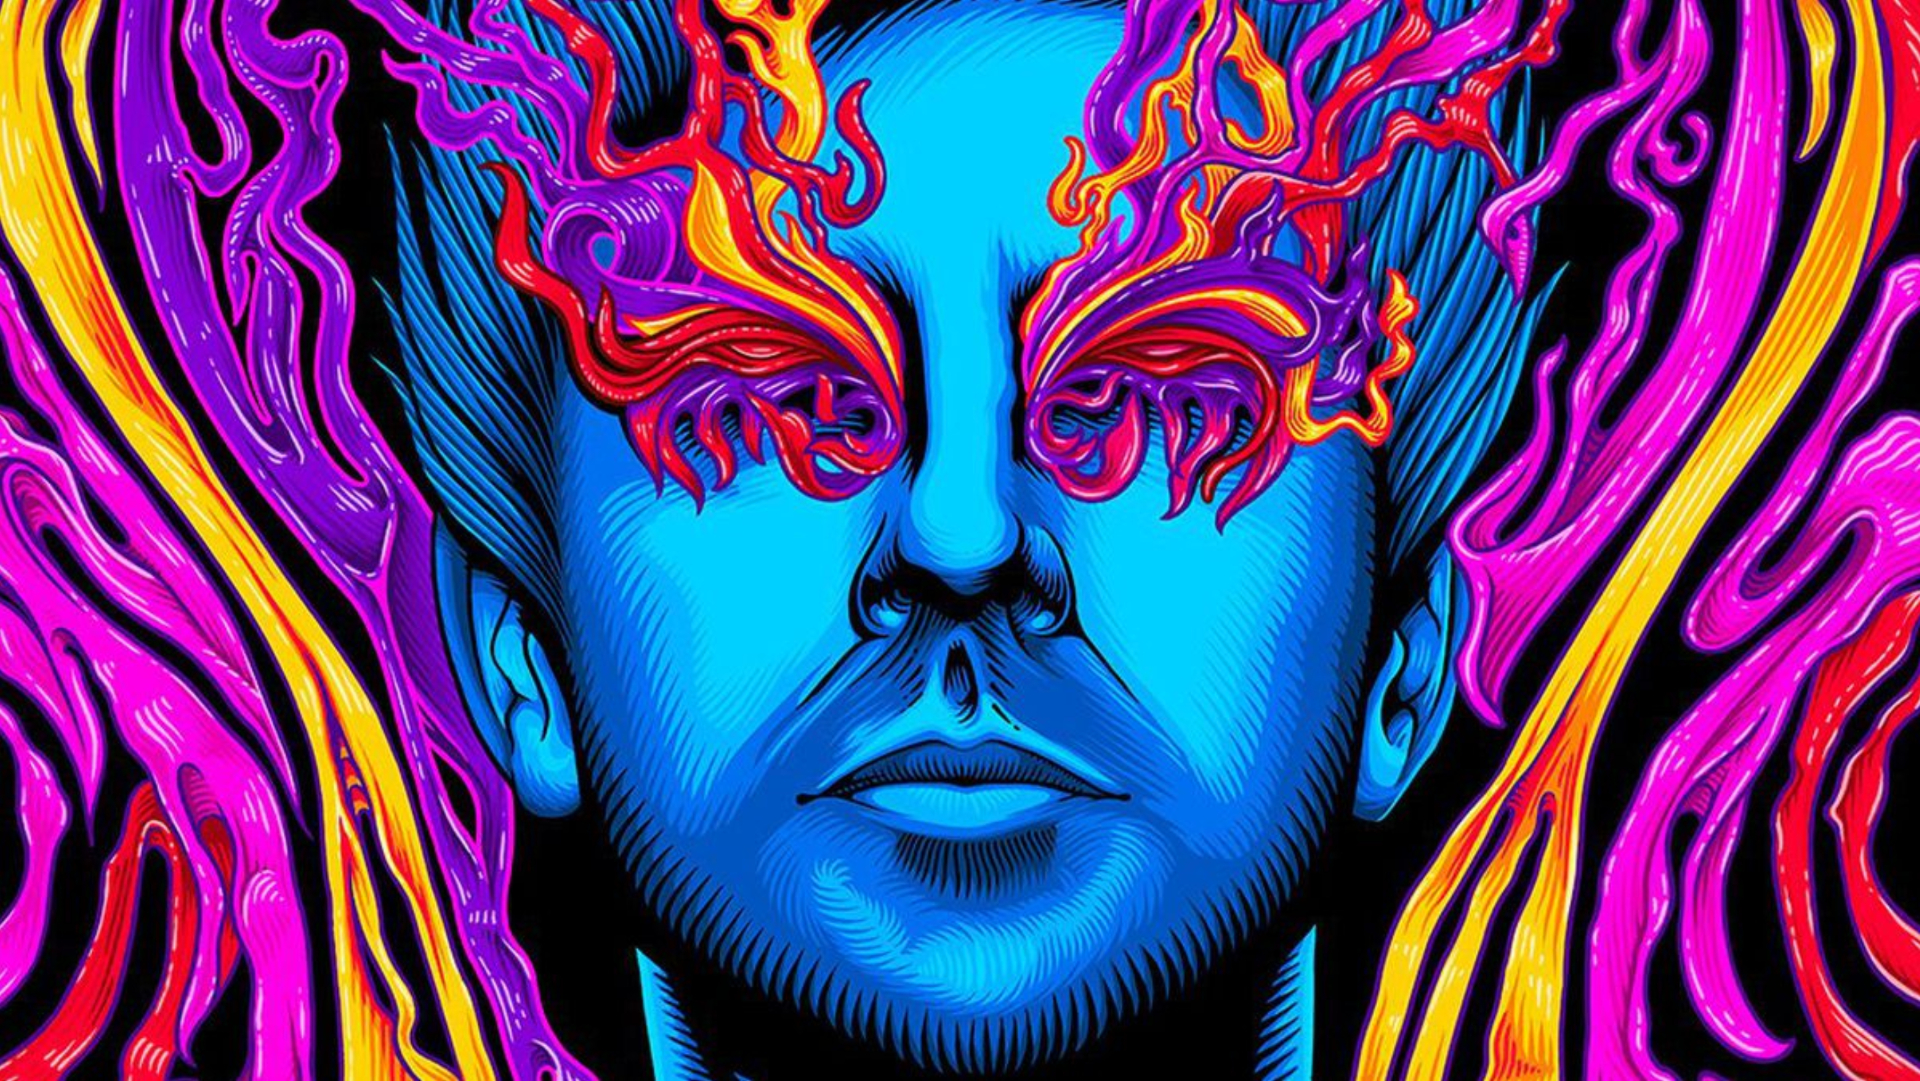 FX's Legion is still the most ambitious Marvel TV show